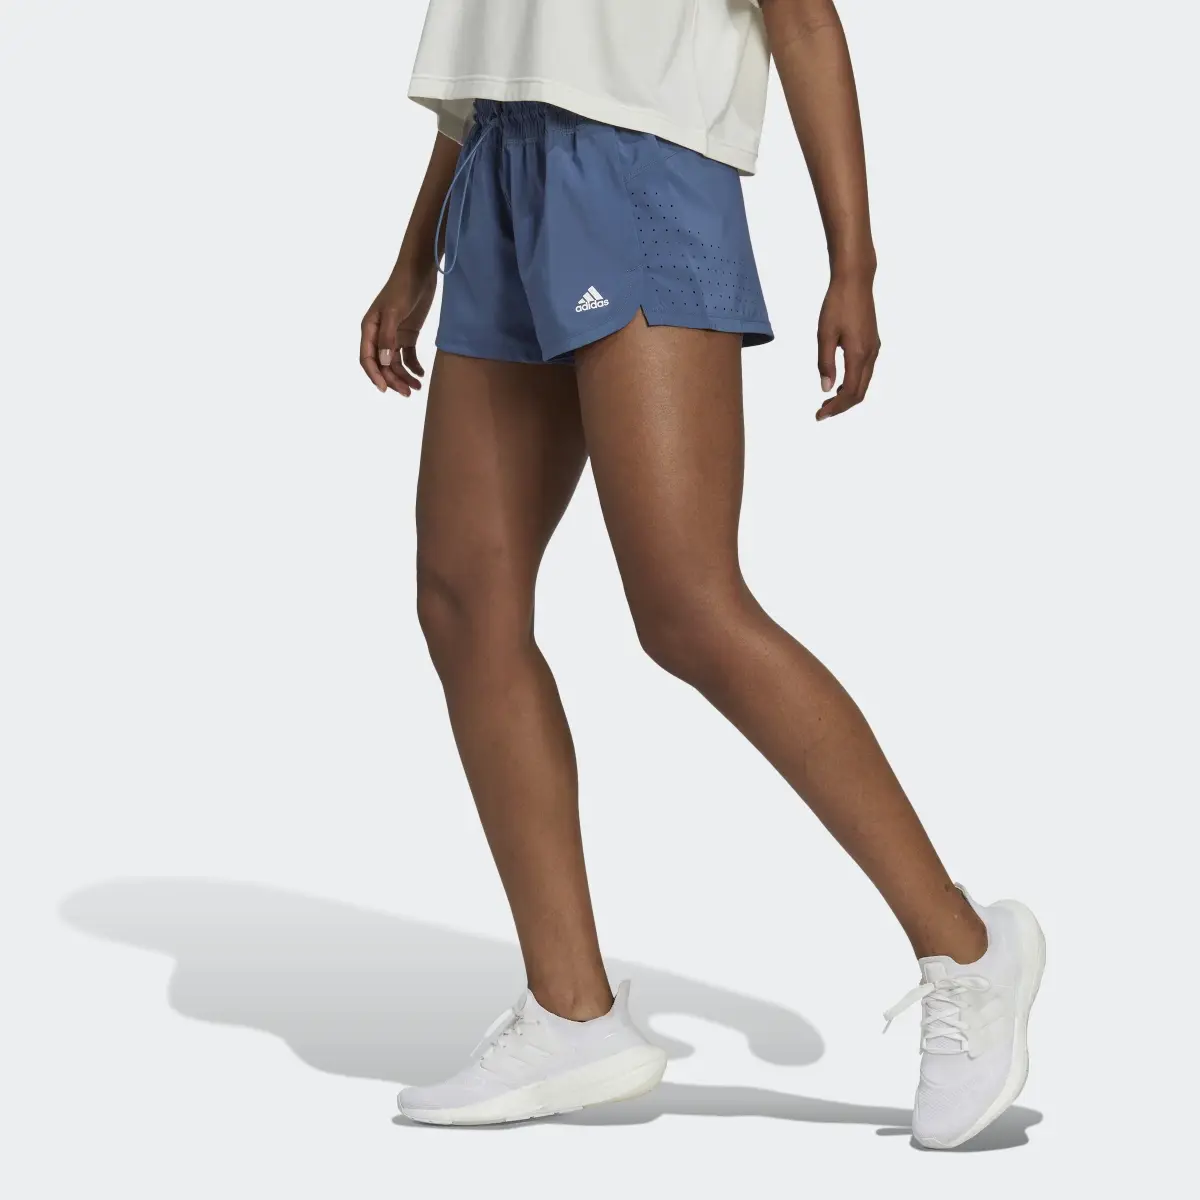 Adidas Perforated Pacer Shorts. 1